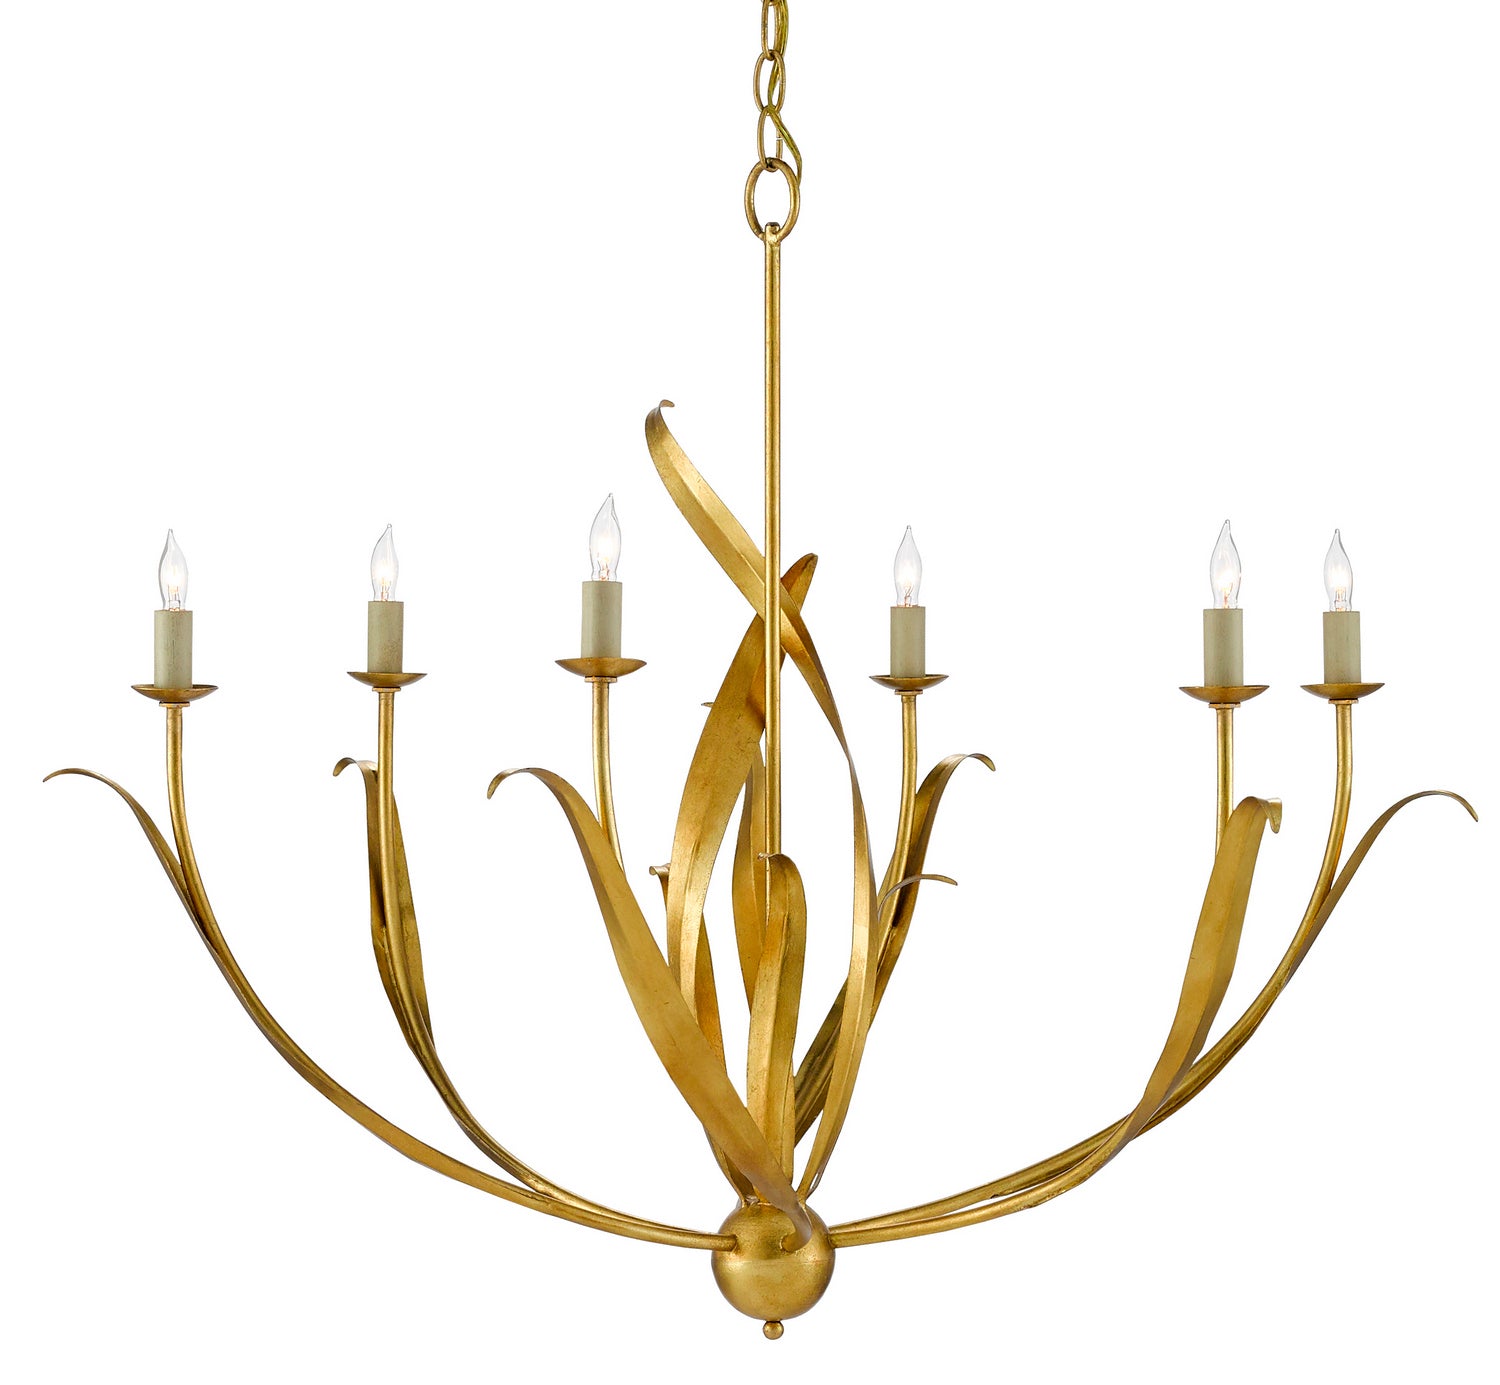 Six Light Chandelier from the Menefee collection in Antique Gold Leaf finish